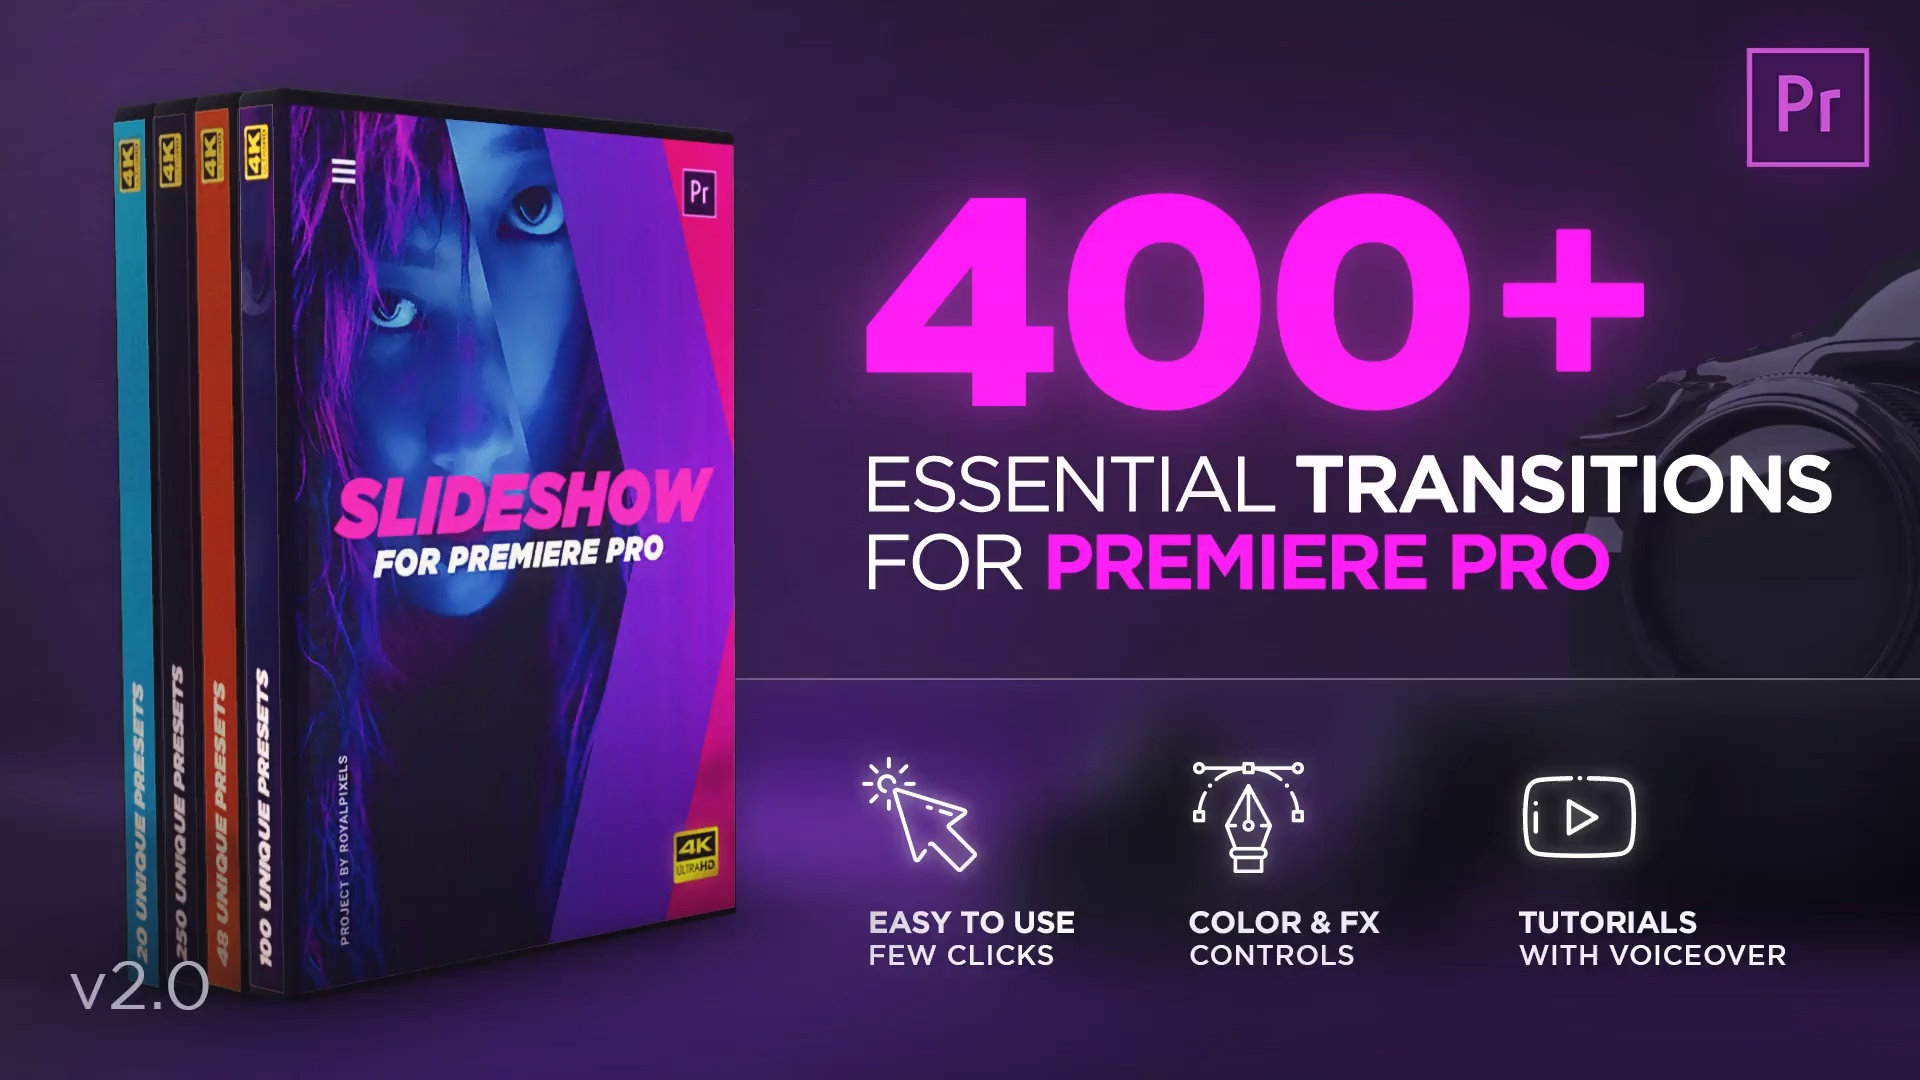 15 Top Essential Graphics Templates for Premiere Pro (Motion Graphics